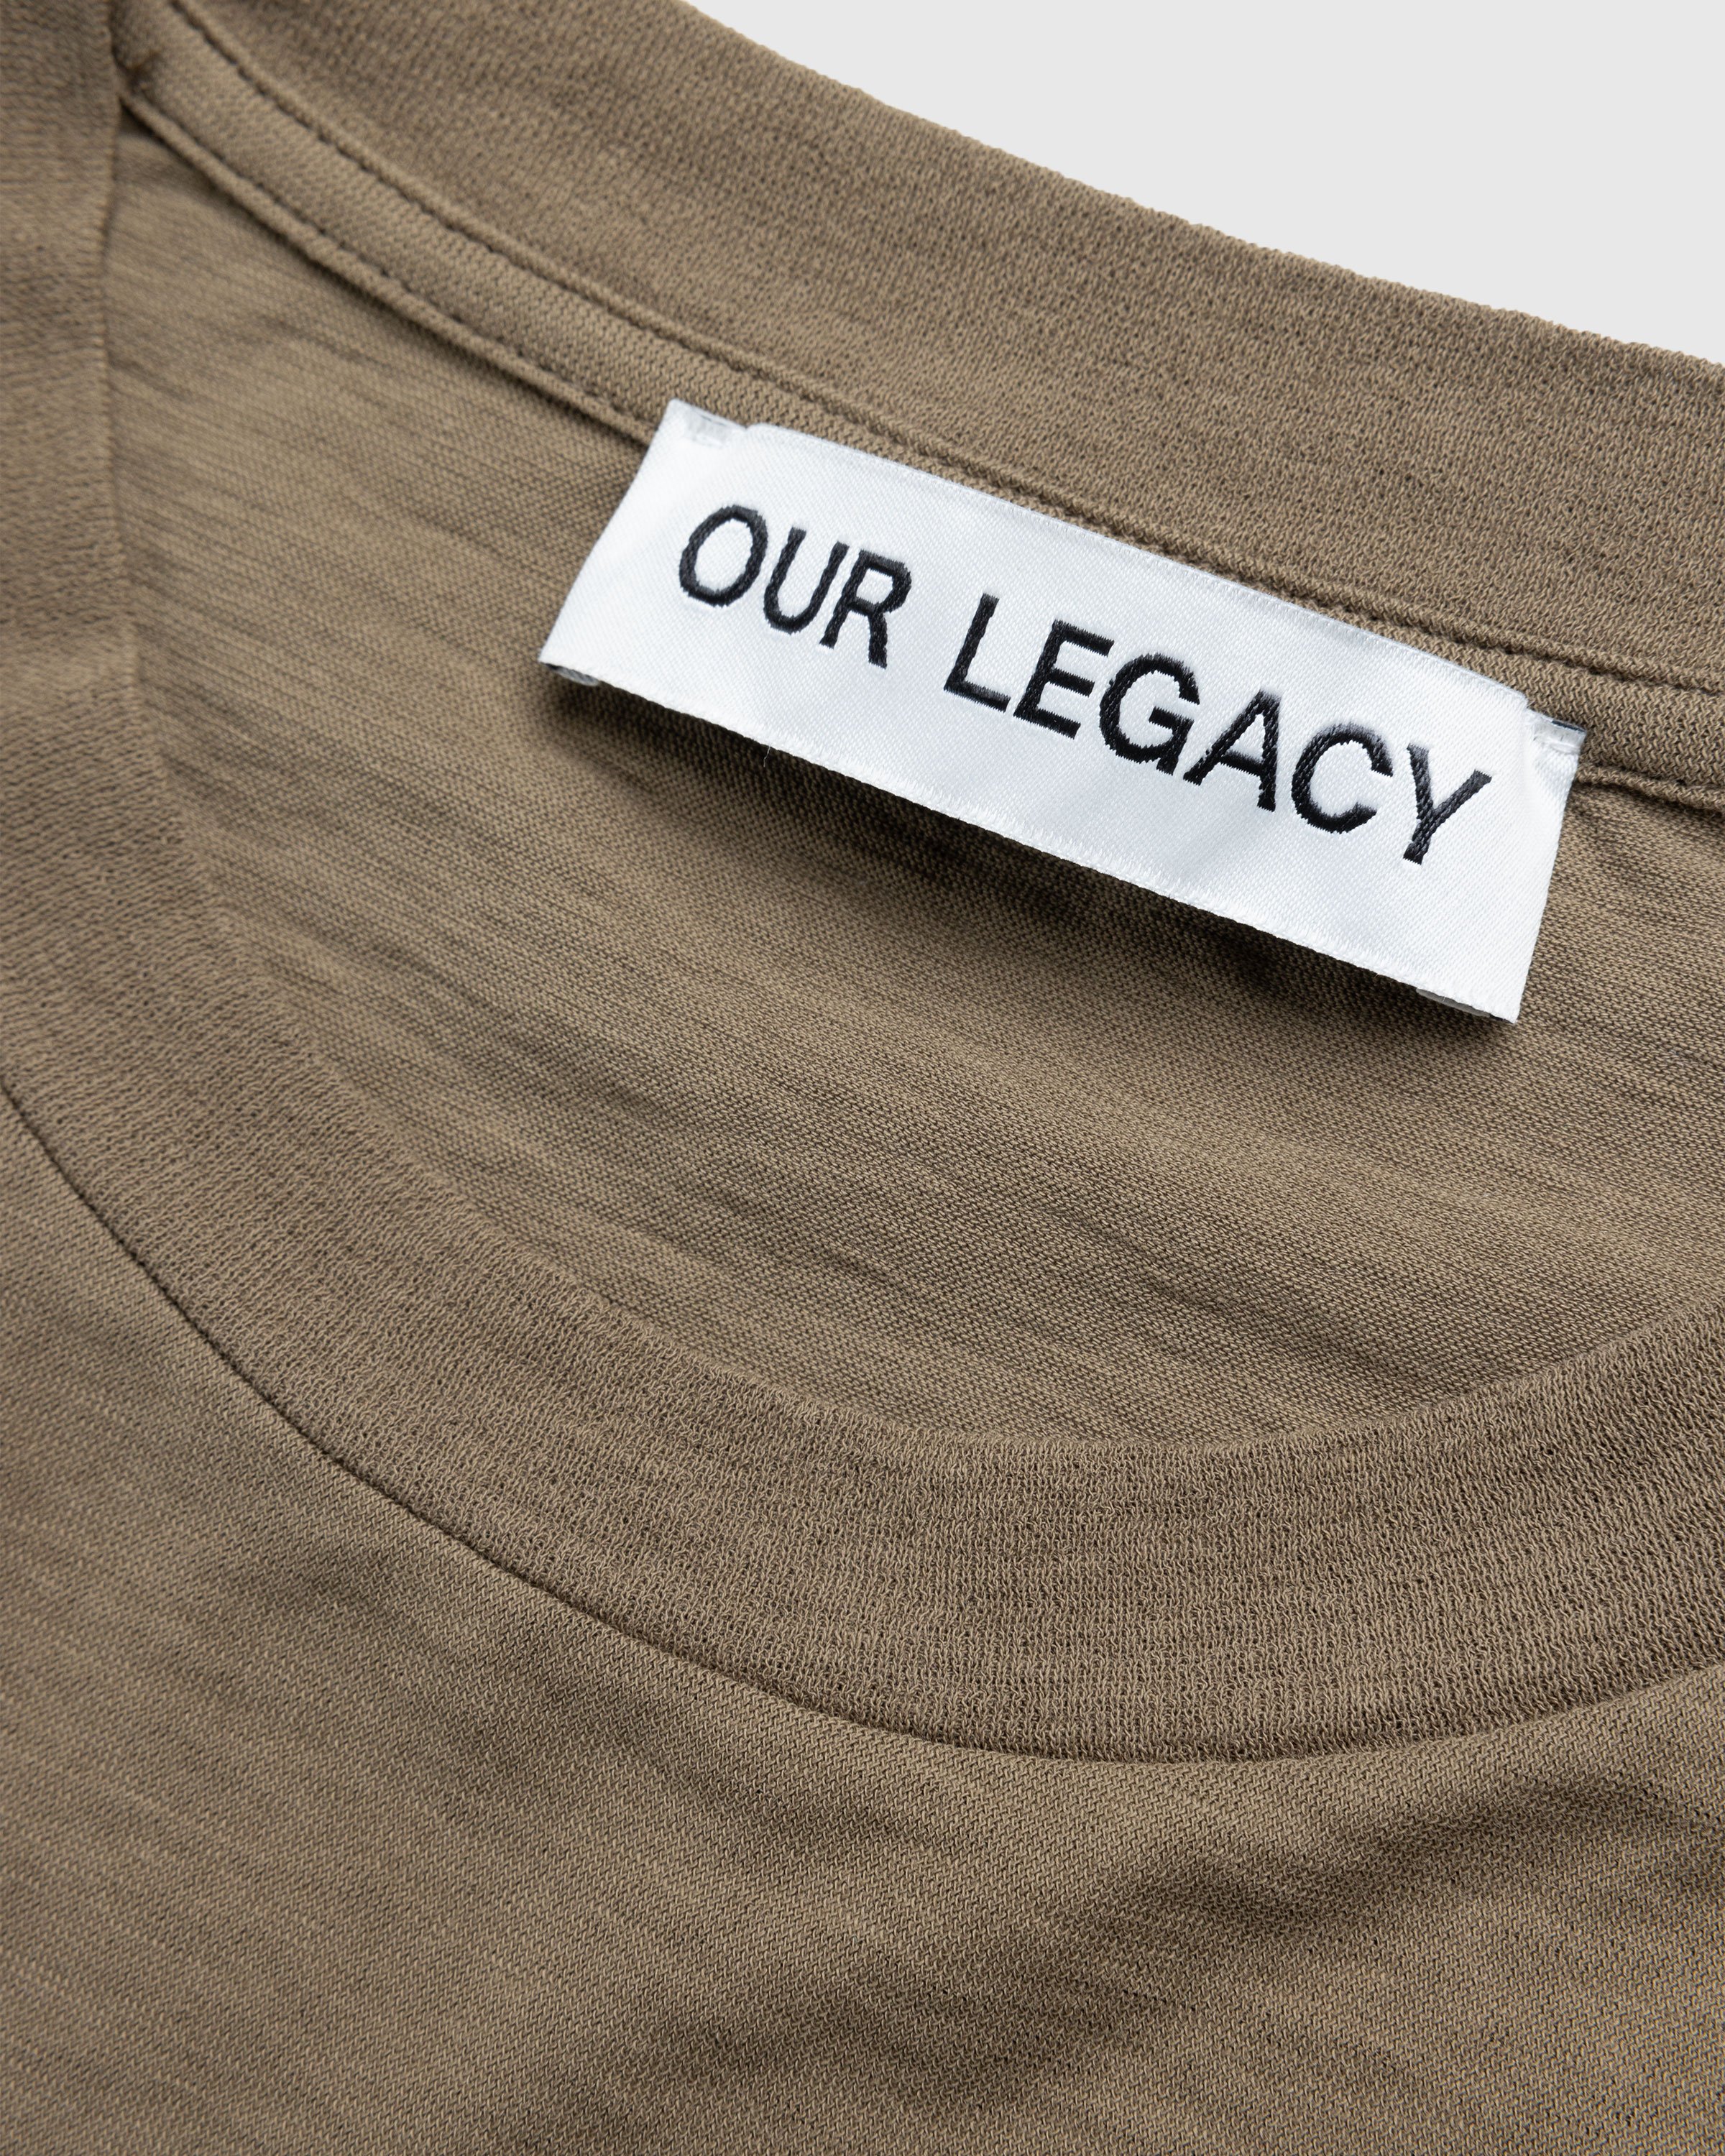 Our Legacy - HOVER T-SHIRT Green - Clothing - Green - Image 6